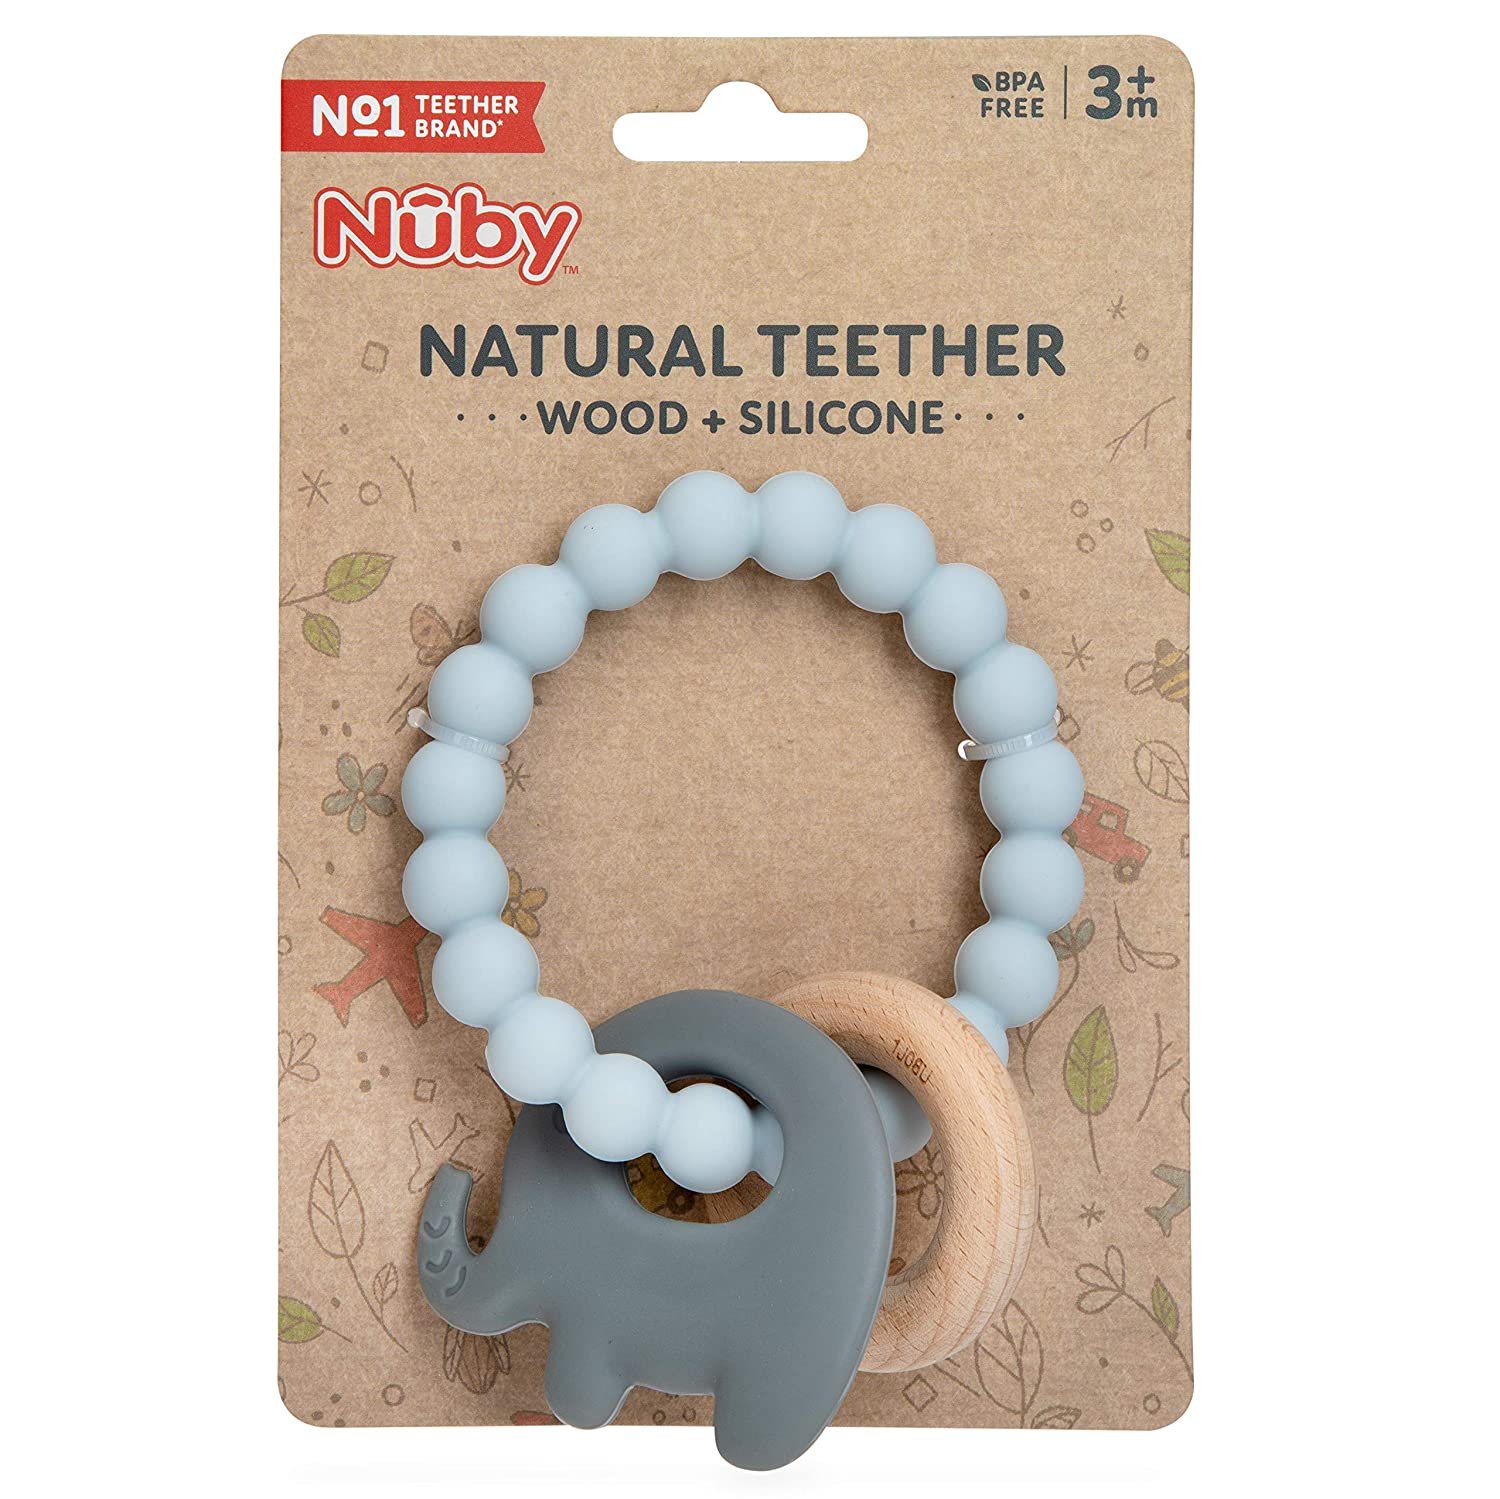 Nuby Natural Teether Silicone Key-Ring Design with Wooden Hoop, Elephant - image 3 of 3